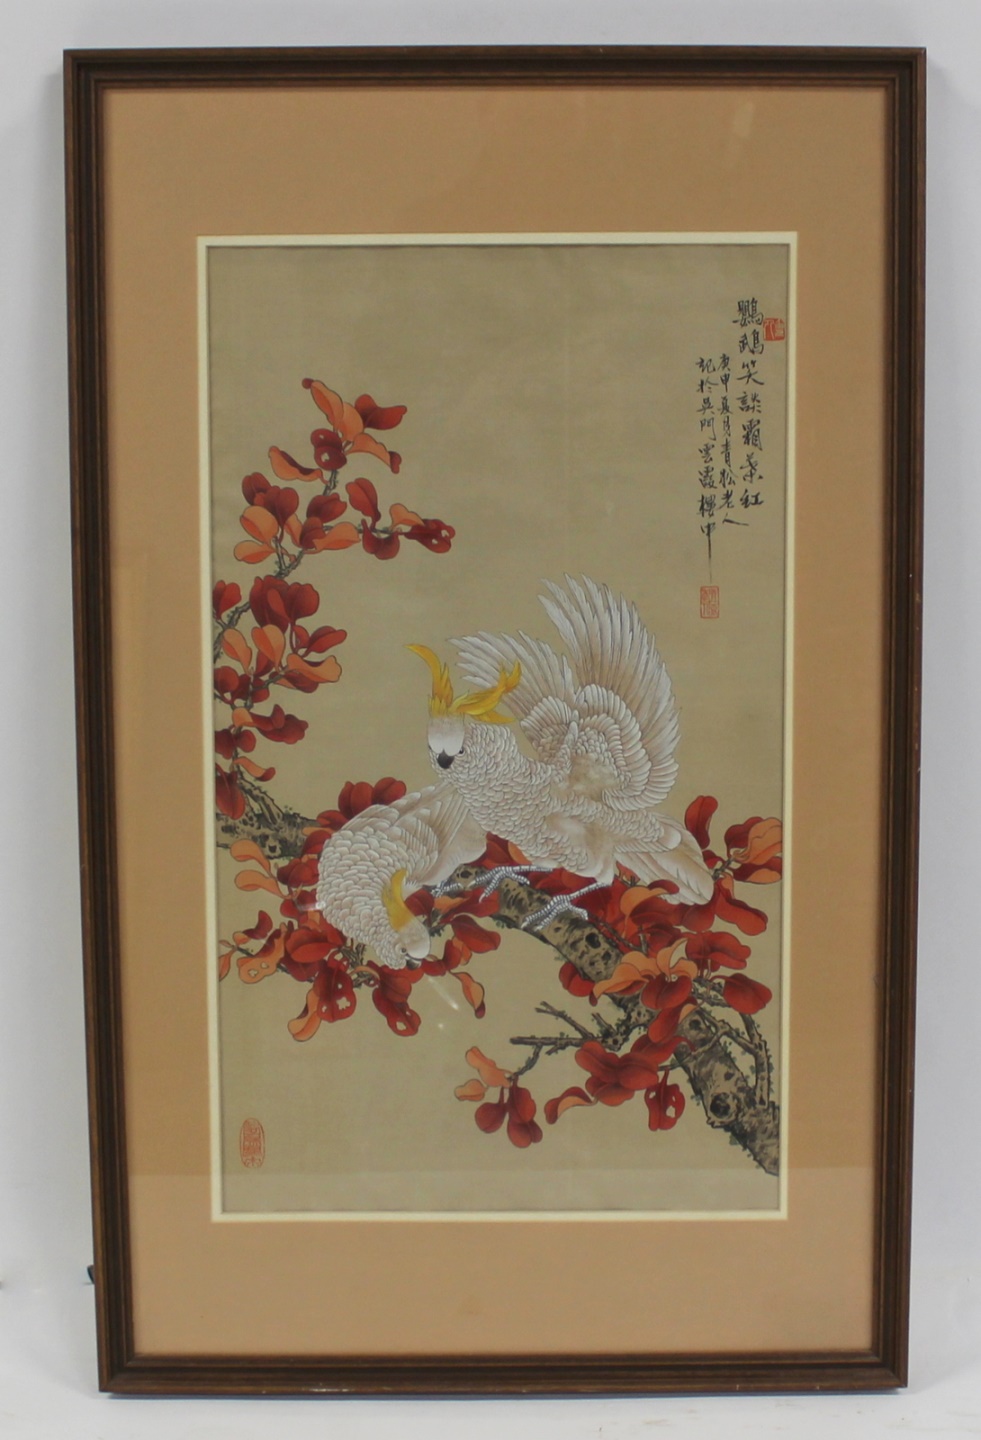 SIGNED CONTEMPORARY ASIAN PAINTING 3bc23f